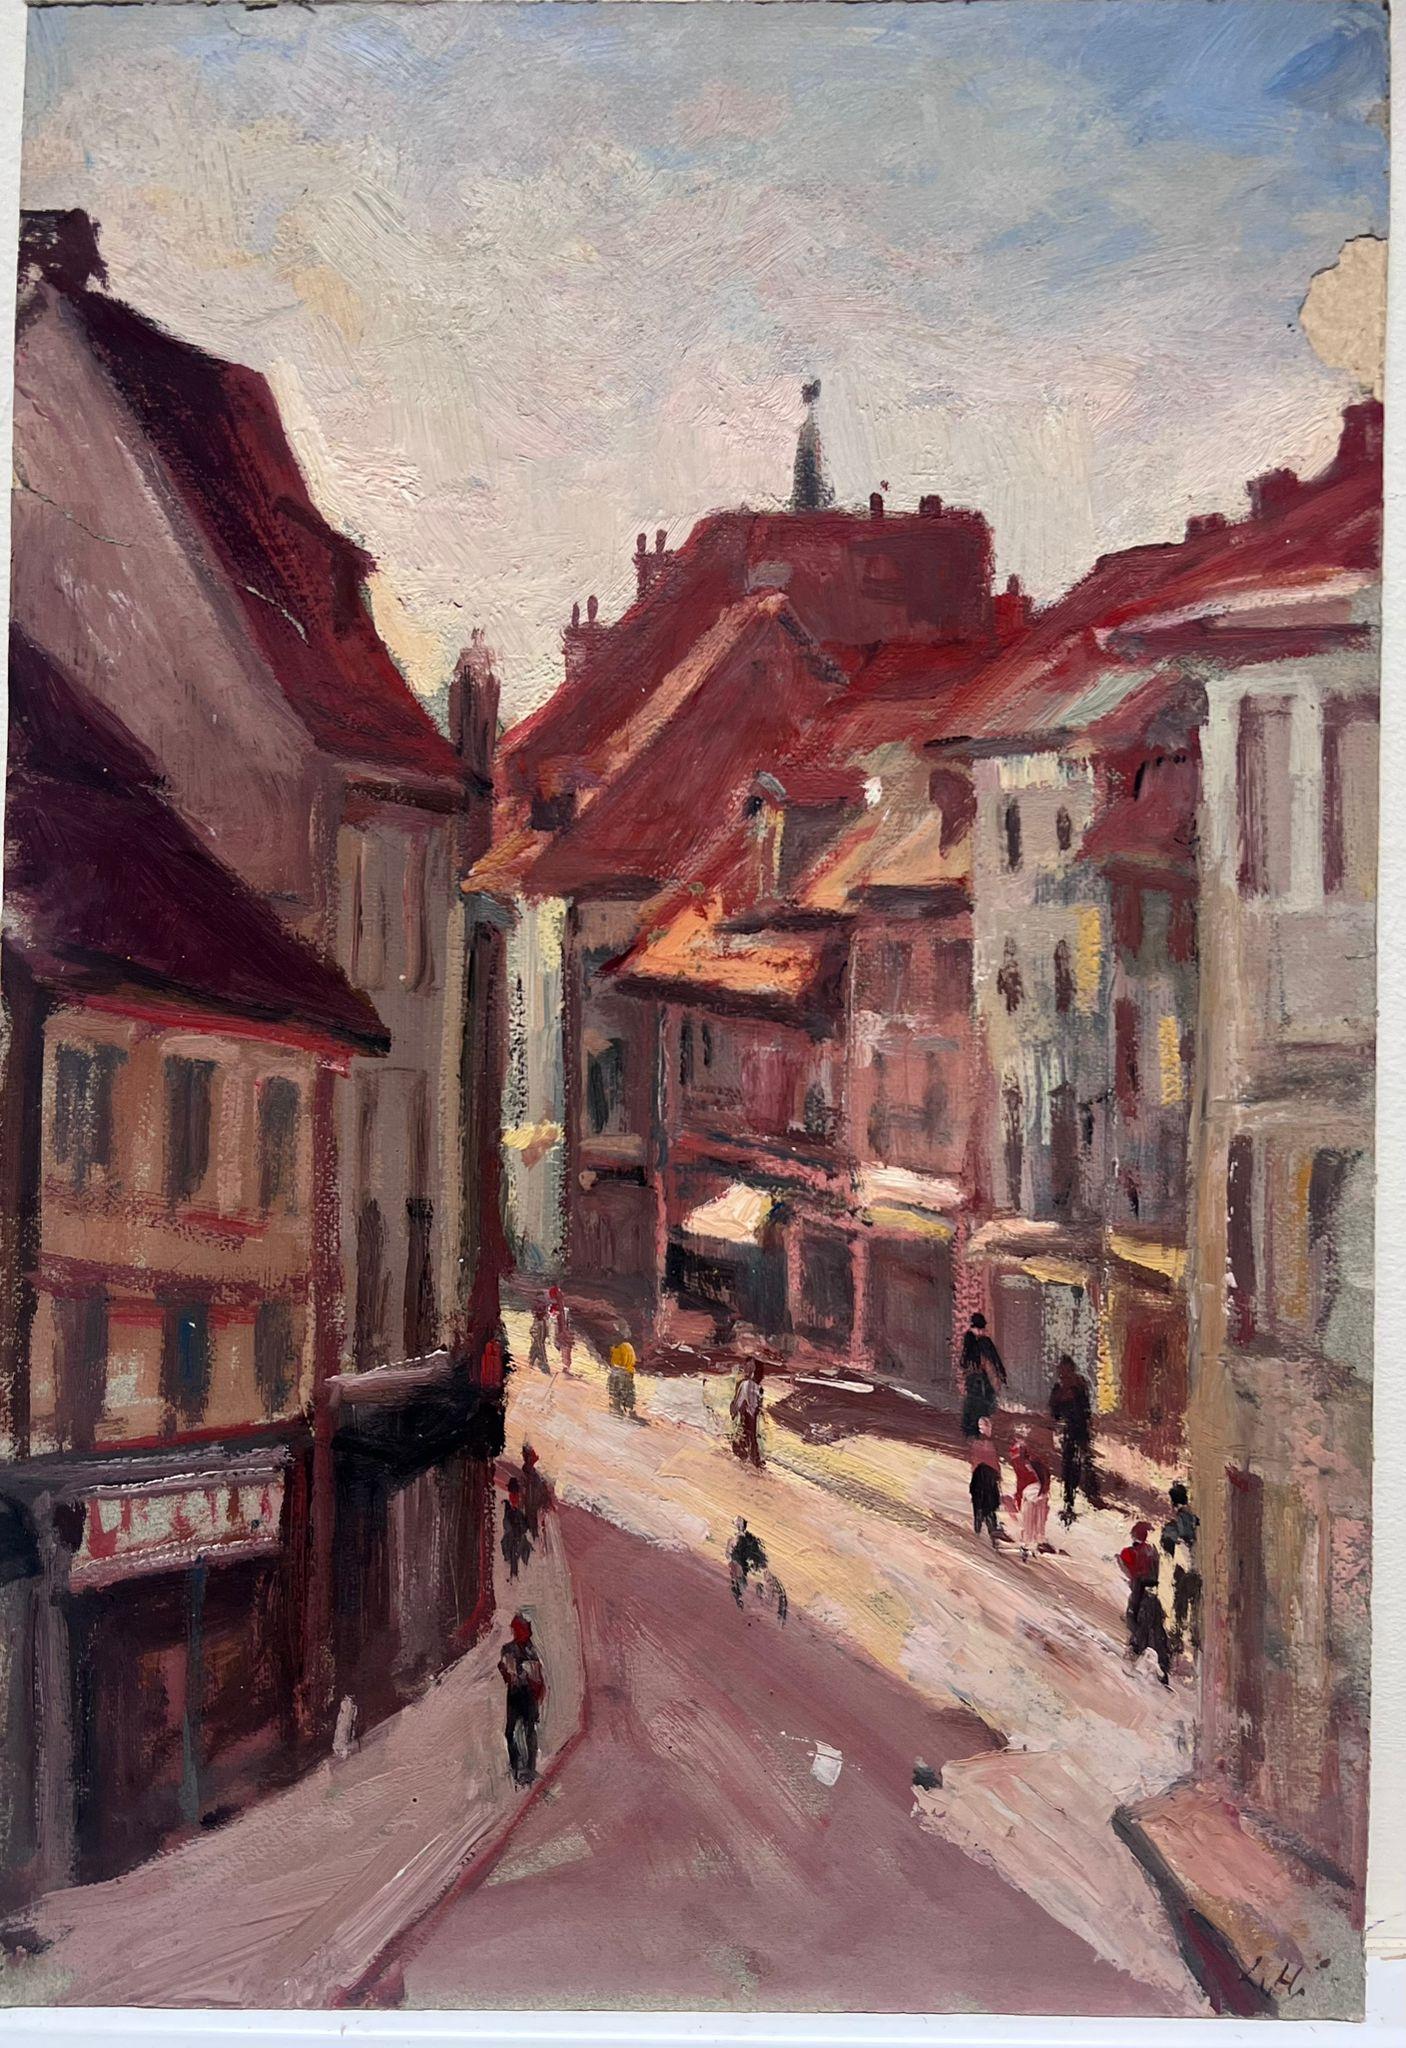 Artist/ School: Leon Hatot (French 1883-1953)

Title: Impressionist oil painting 

Medium: signed  oil painting on thick paper, stuck on board unframed.

Size: painting: 19 x 13 inches

Provenance: all the paintings we have for sale by this artist